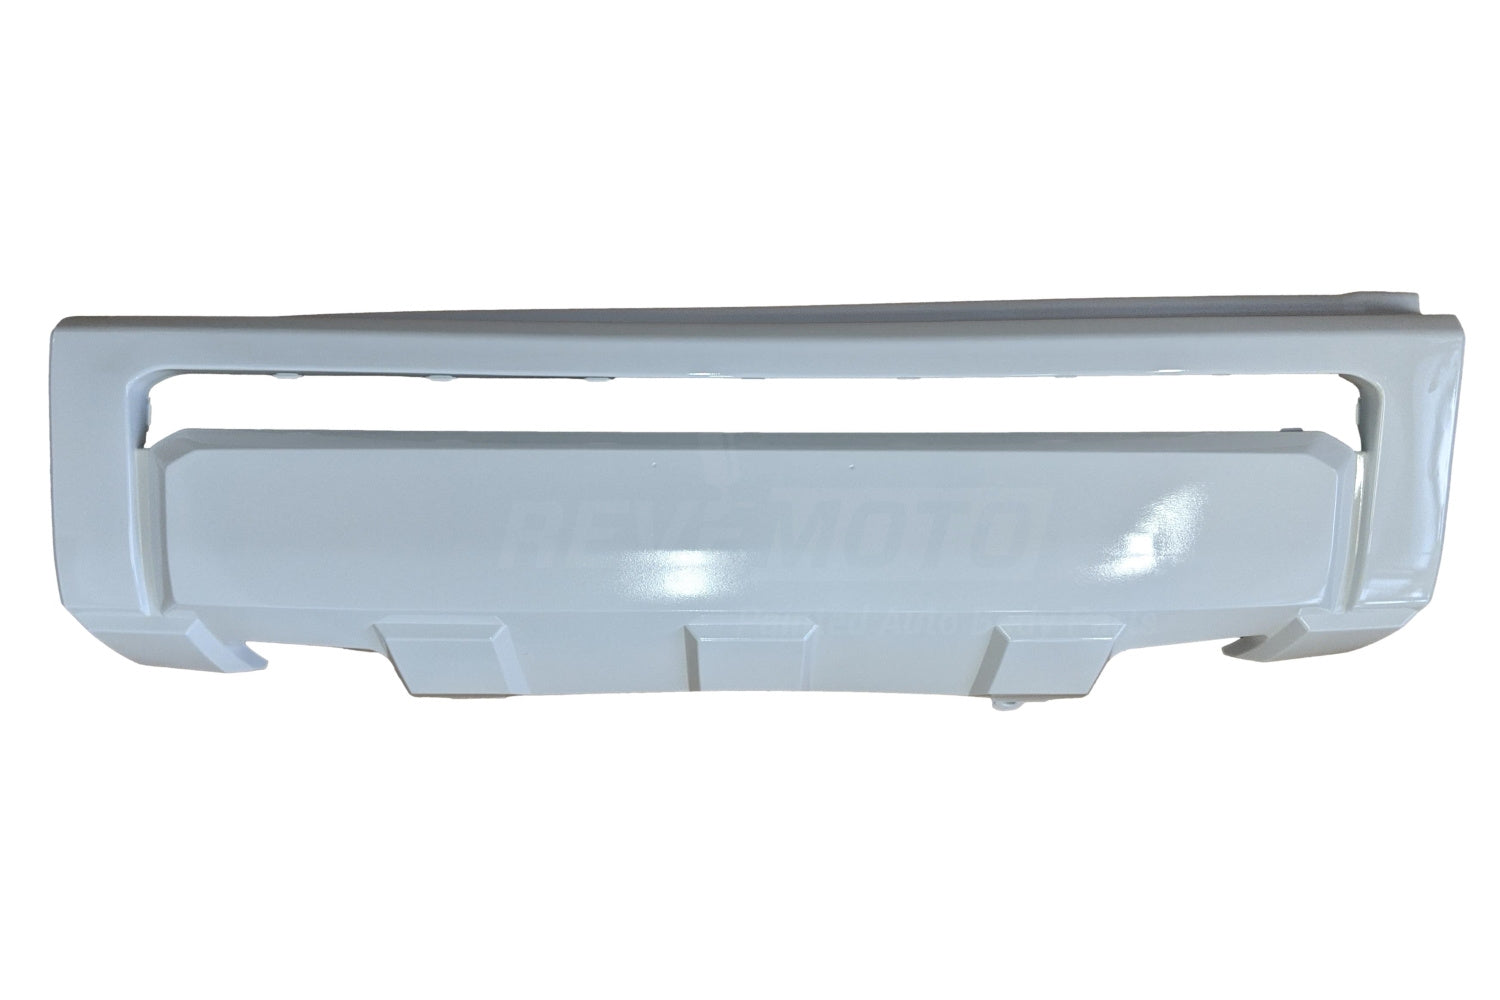 2014-2021 Toyota Tundra Front Bumper Painted - Super White II (40) _ SR_SR5_LIMITED_GRAY PLATINUM [4WD_RWD]_ Textured 539110C050_TO1000404